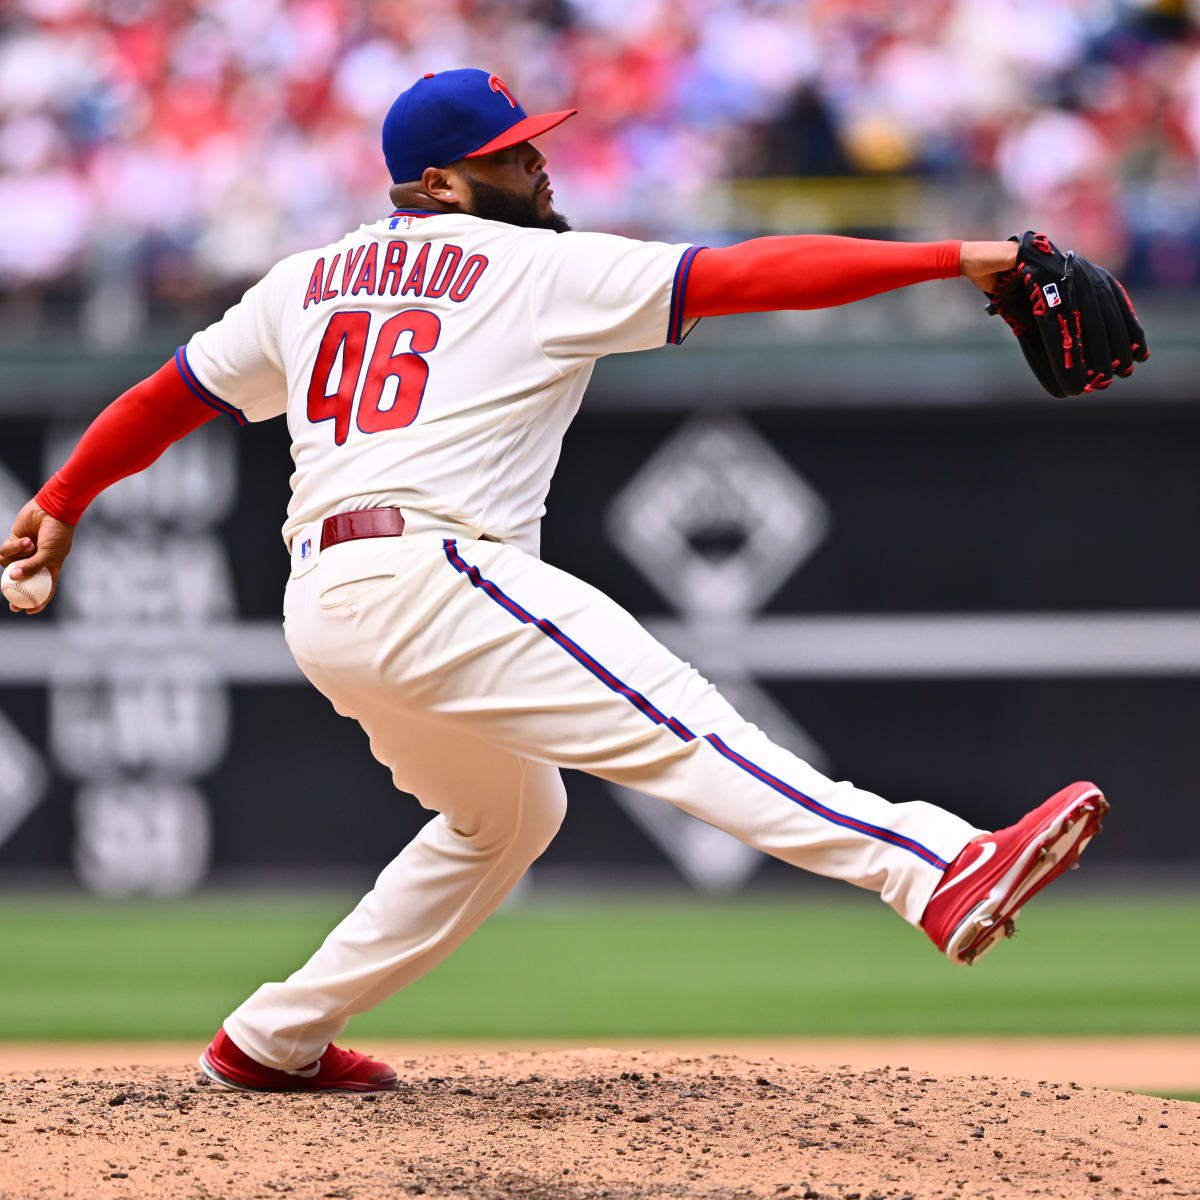 Phillies José Alvarado Scheduled to Make Rehab Appearance with Reading